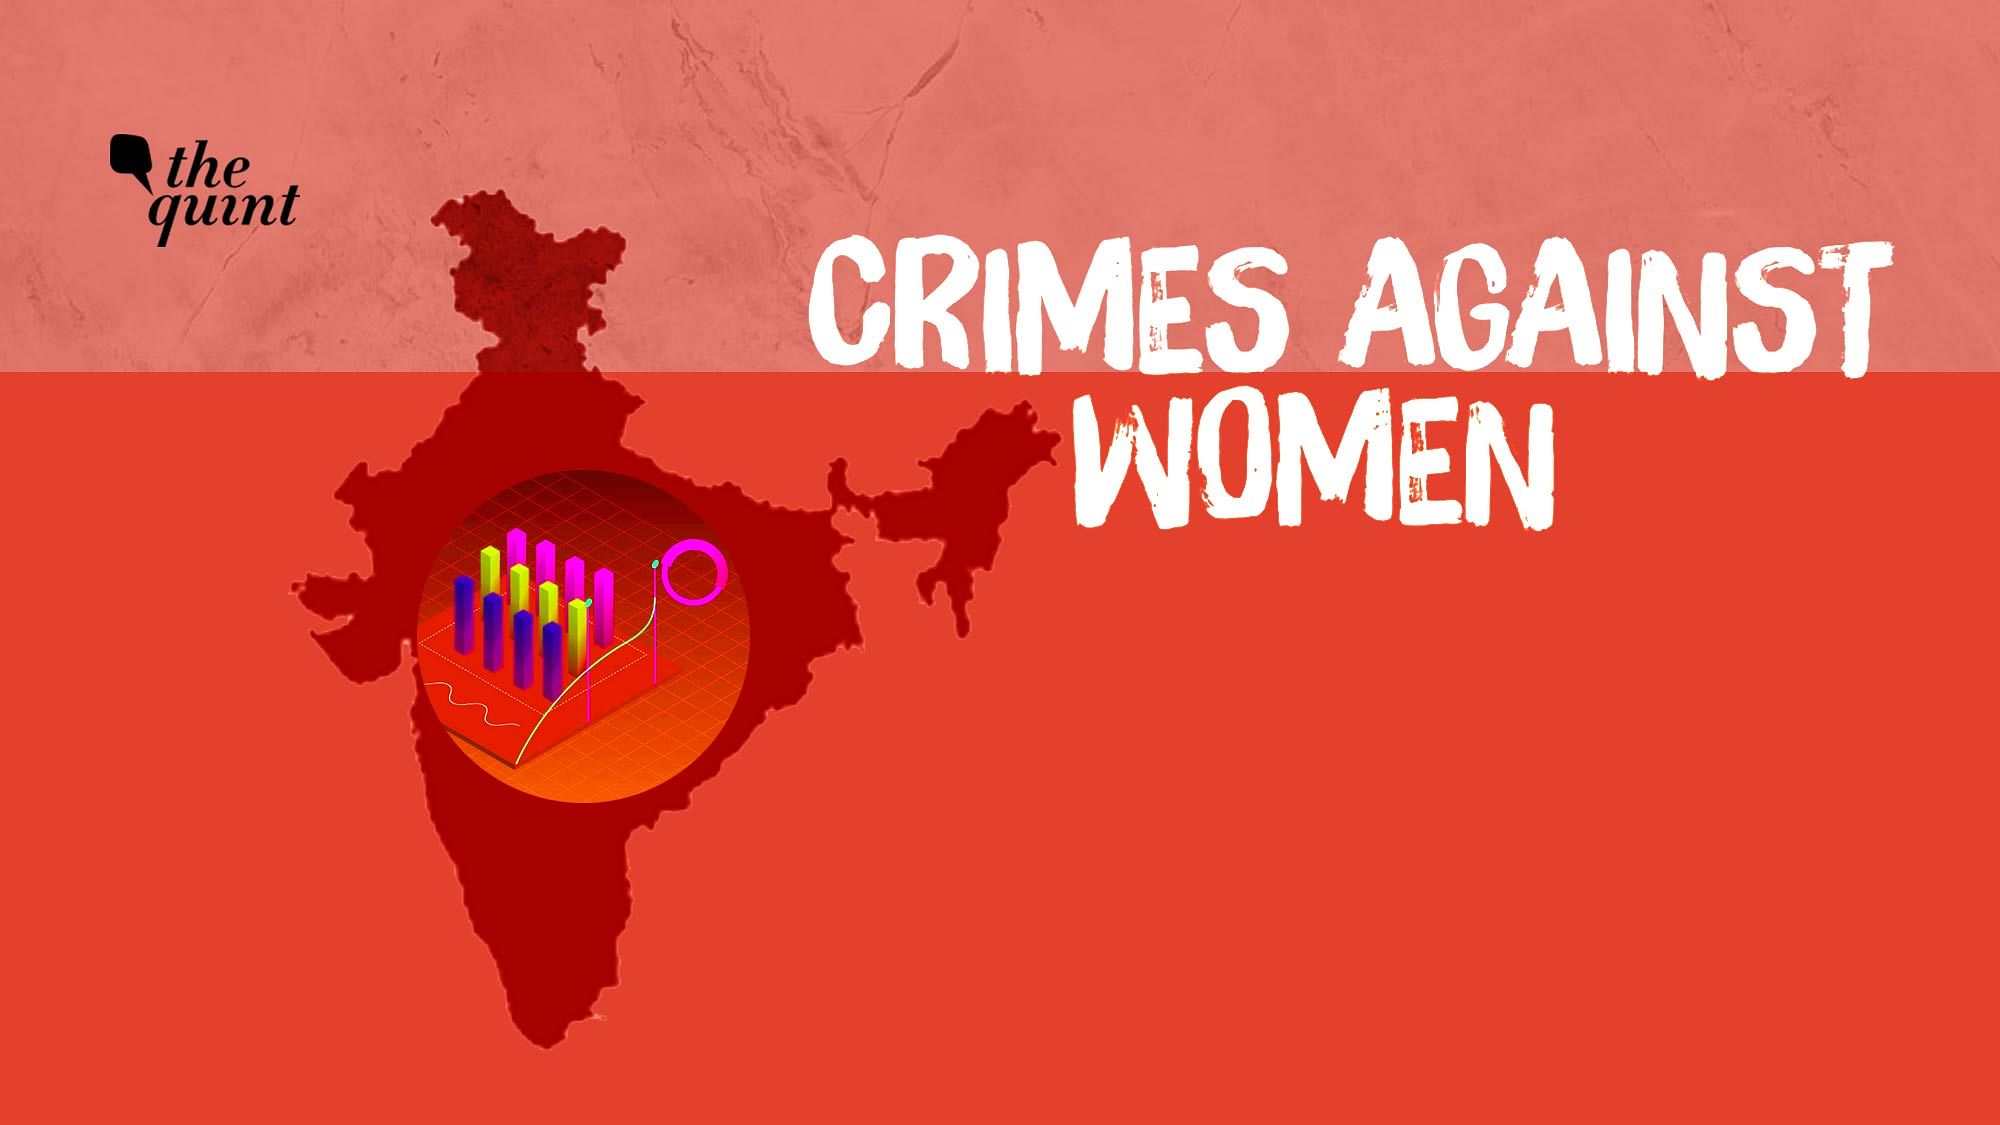 NCRB data shows that the rate of crime against women has risen by 7.3% in 2019, as compared to 2018.